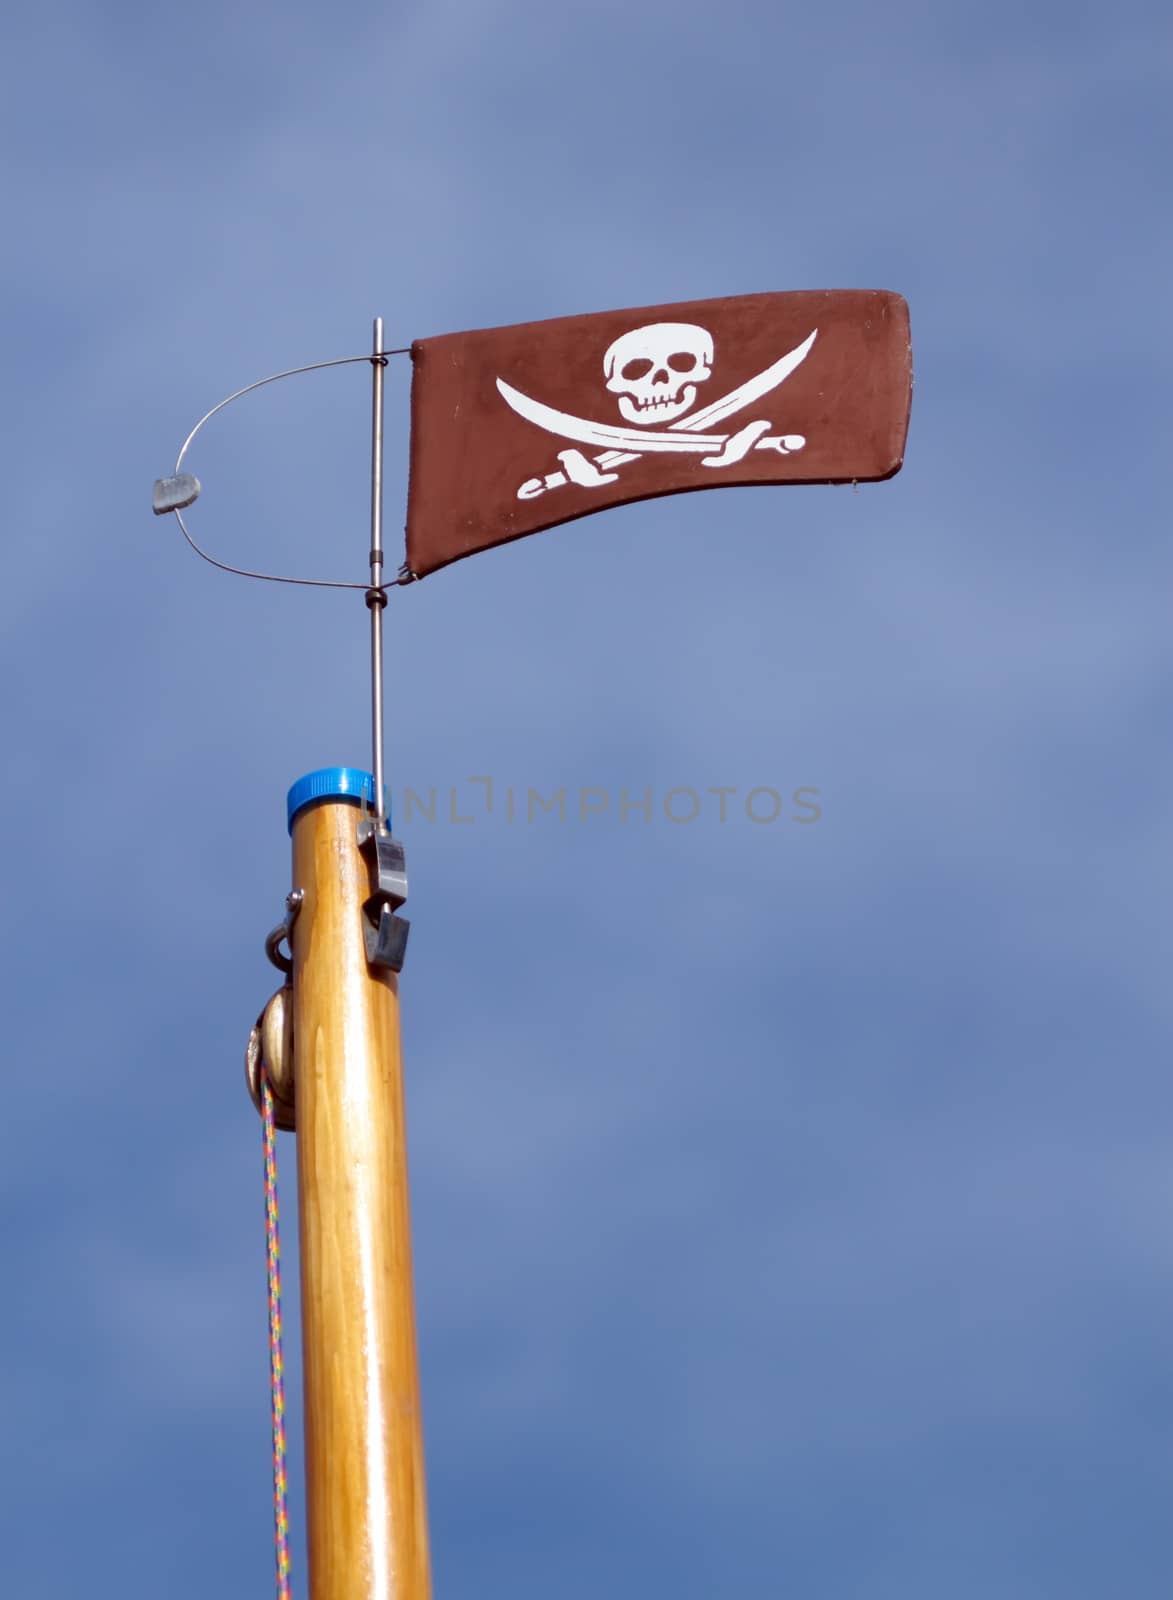 Jolly Roger skull and crossbones pirate flag upon a wood mast